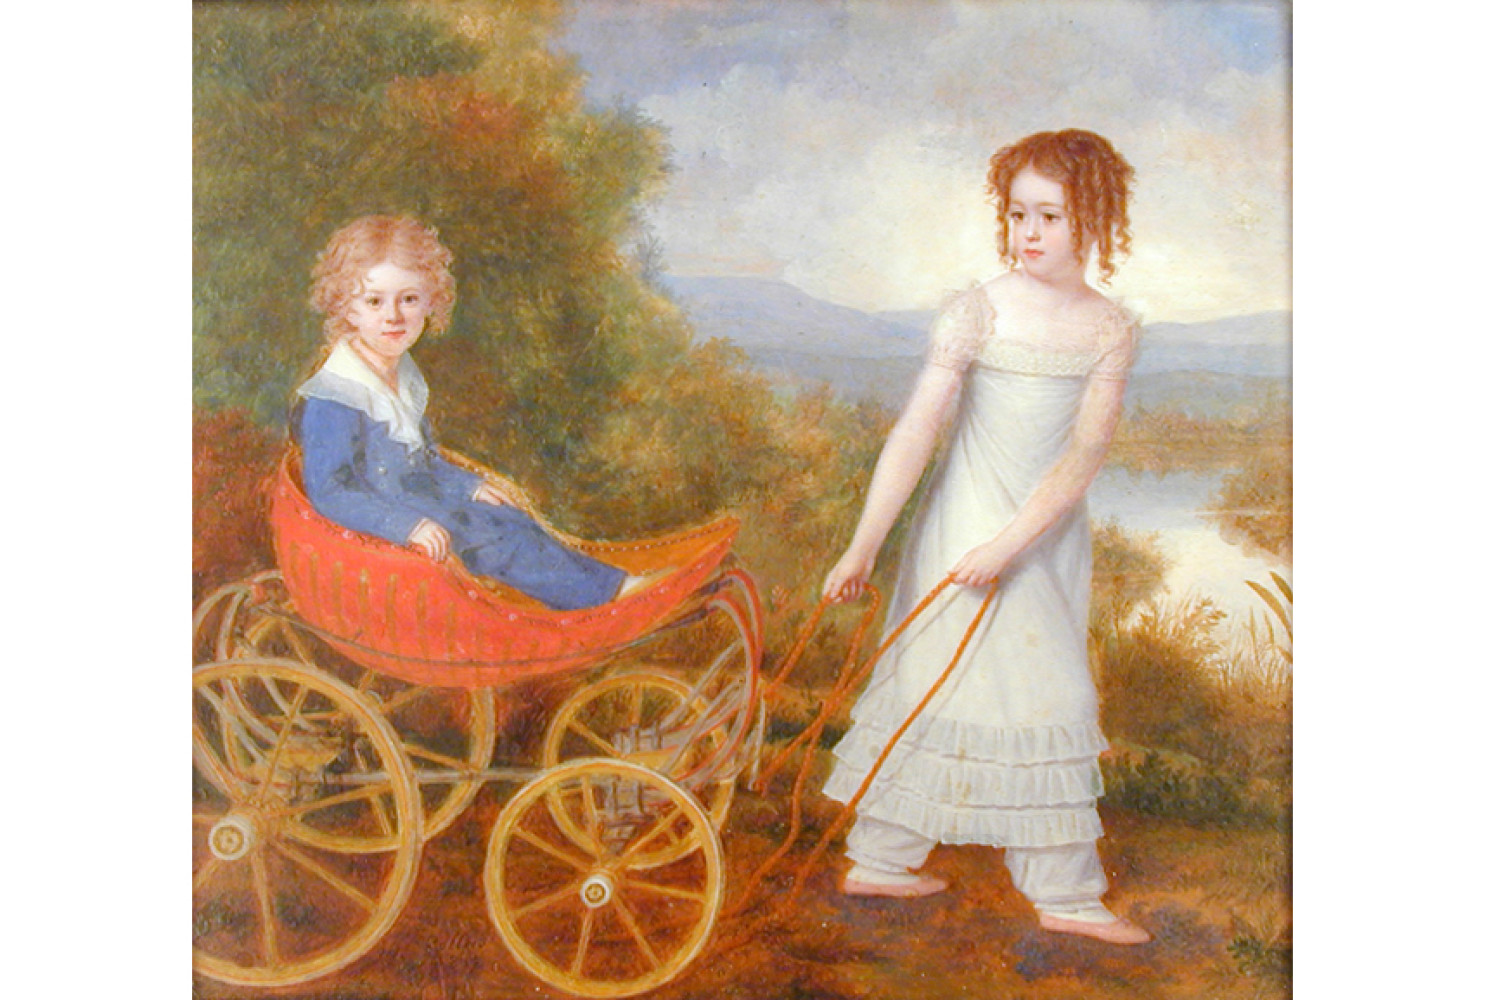 Ralph Stead (1815-1858)and Anne Stead Izard (1812-1892), 1801, by Louis Antonie Collas (French, 1775-after 1829); oil on porcelain; 7 3/8 x 9 1/8 inches; Bequest of Mrs. Julius Heyward; 1943.004.0001